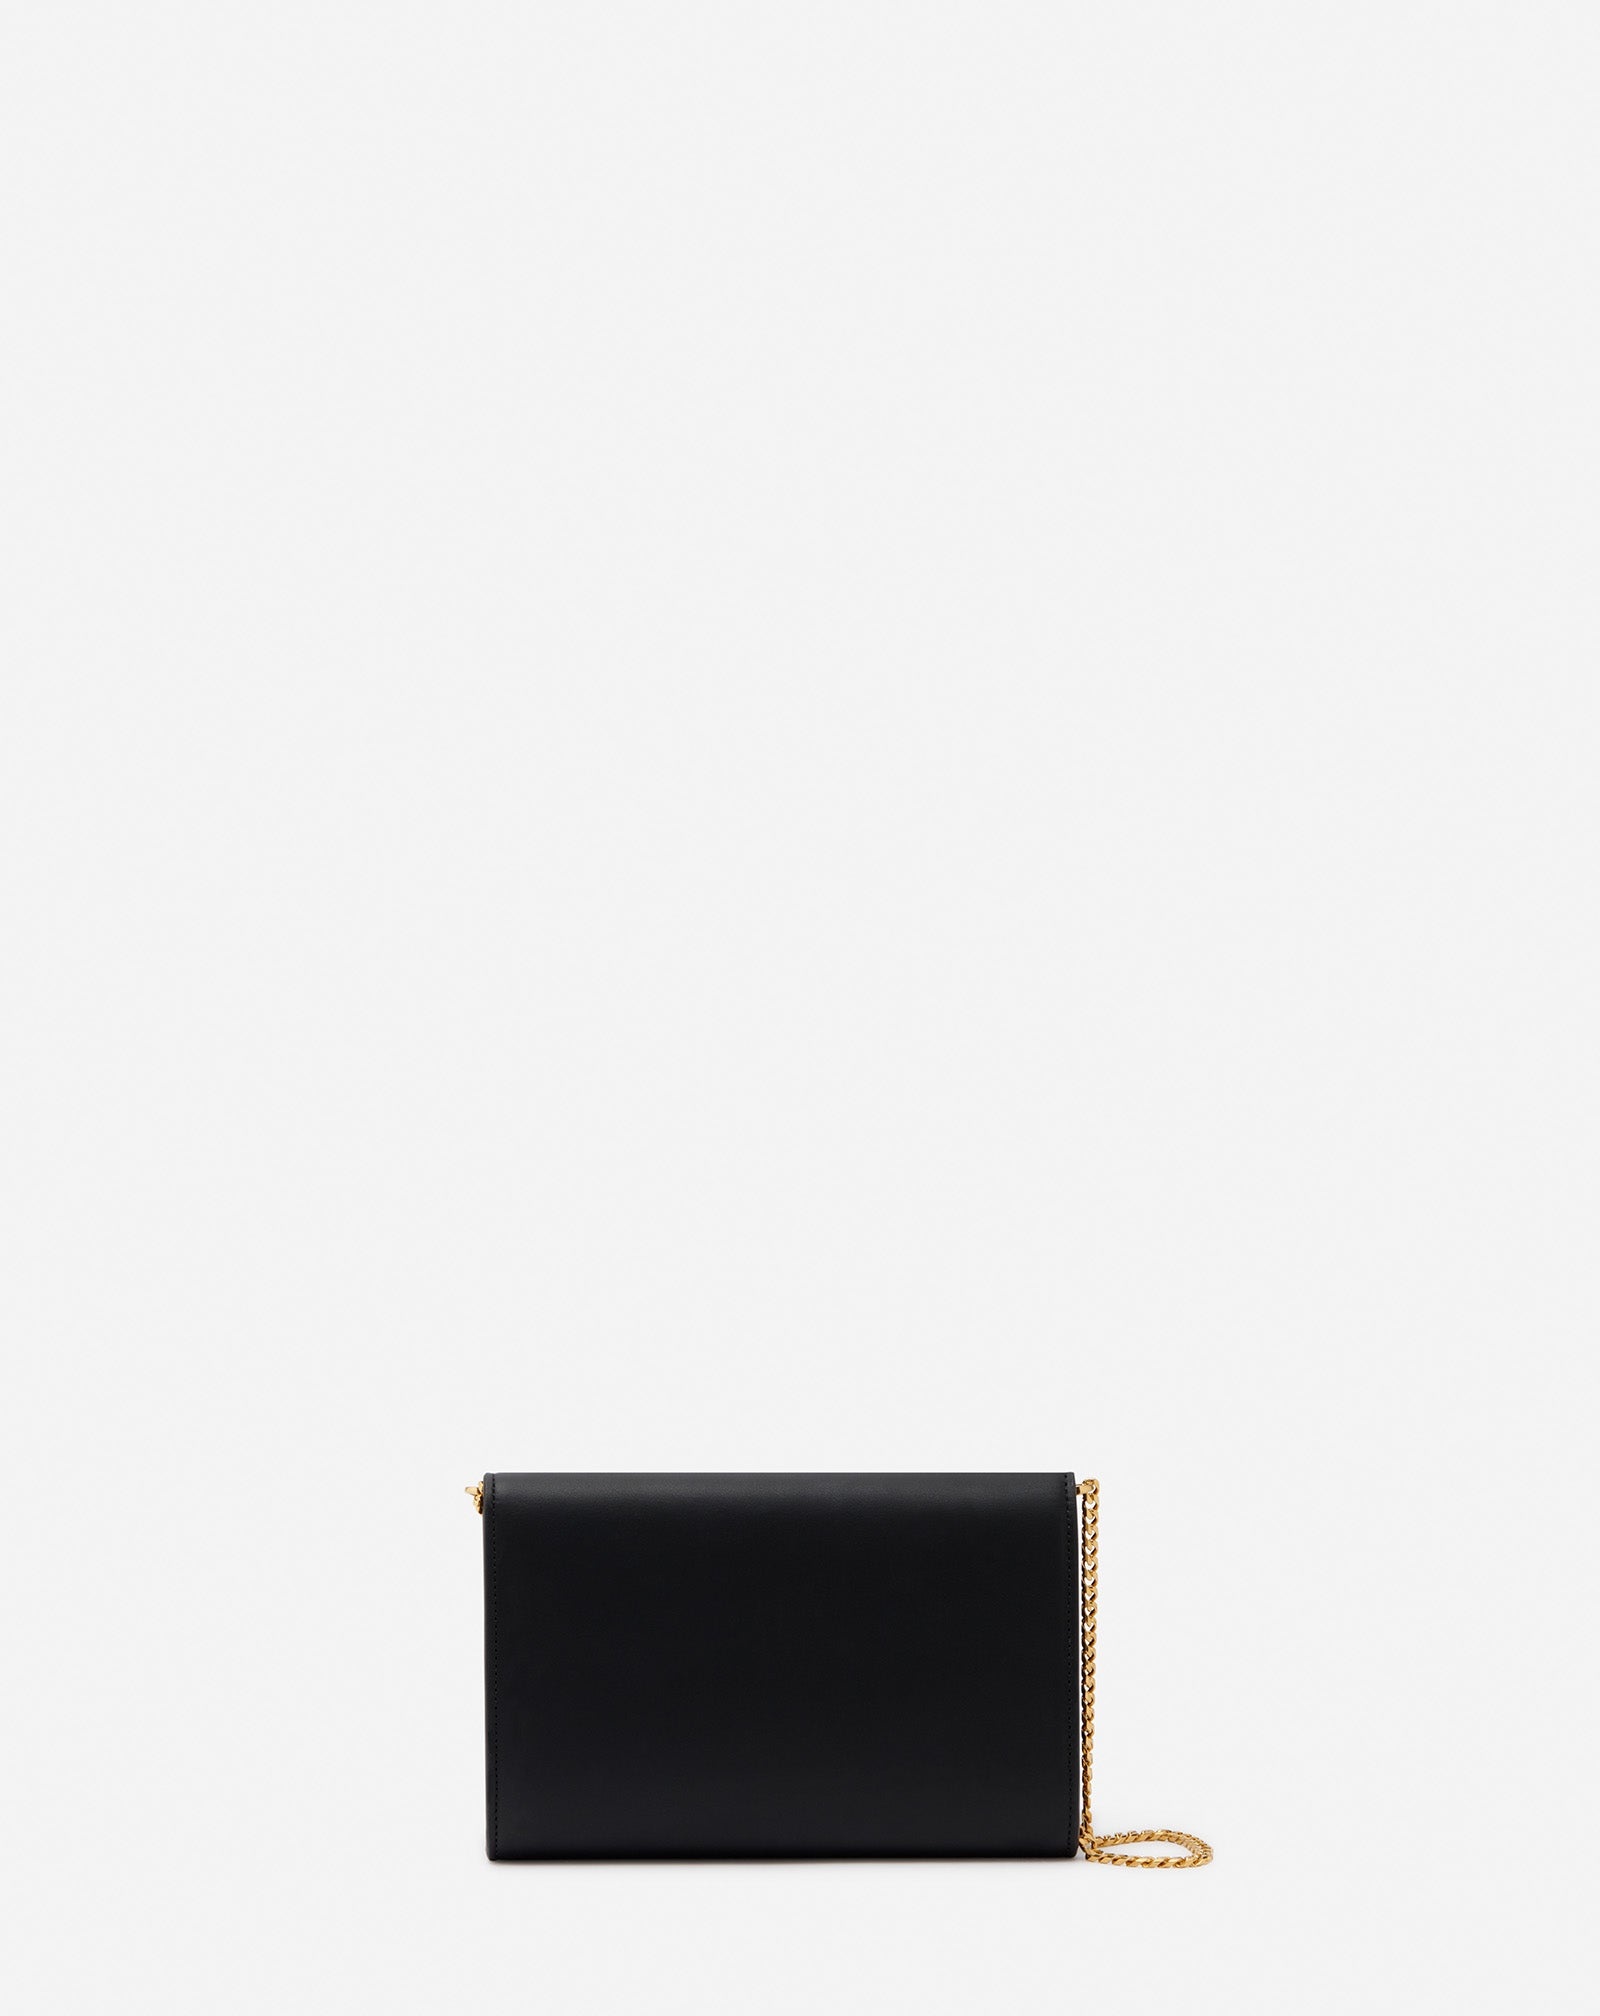 CONCERTO LEATHER CLUTCH - 5